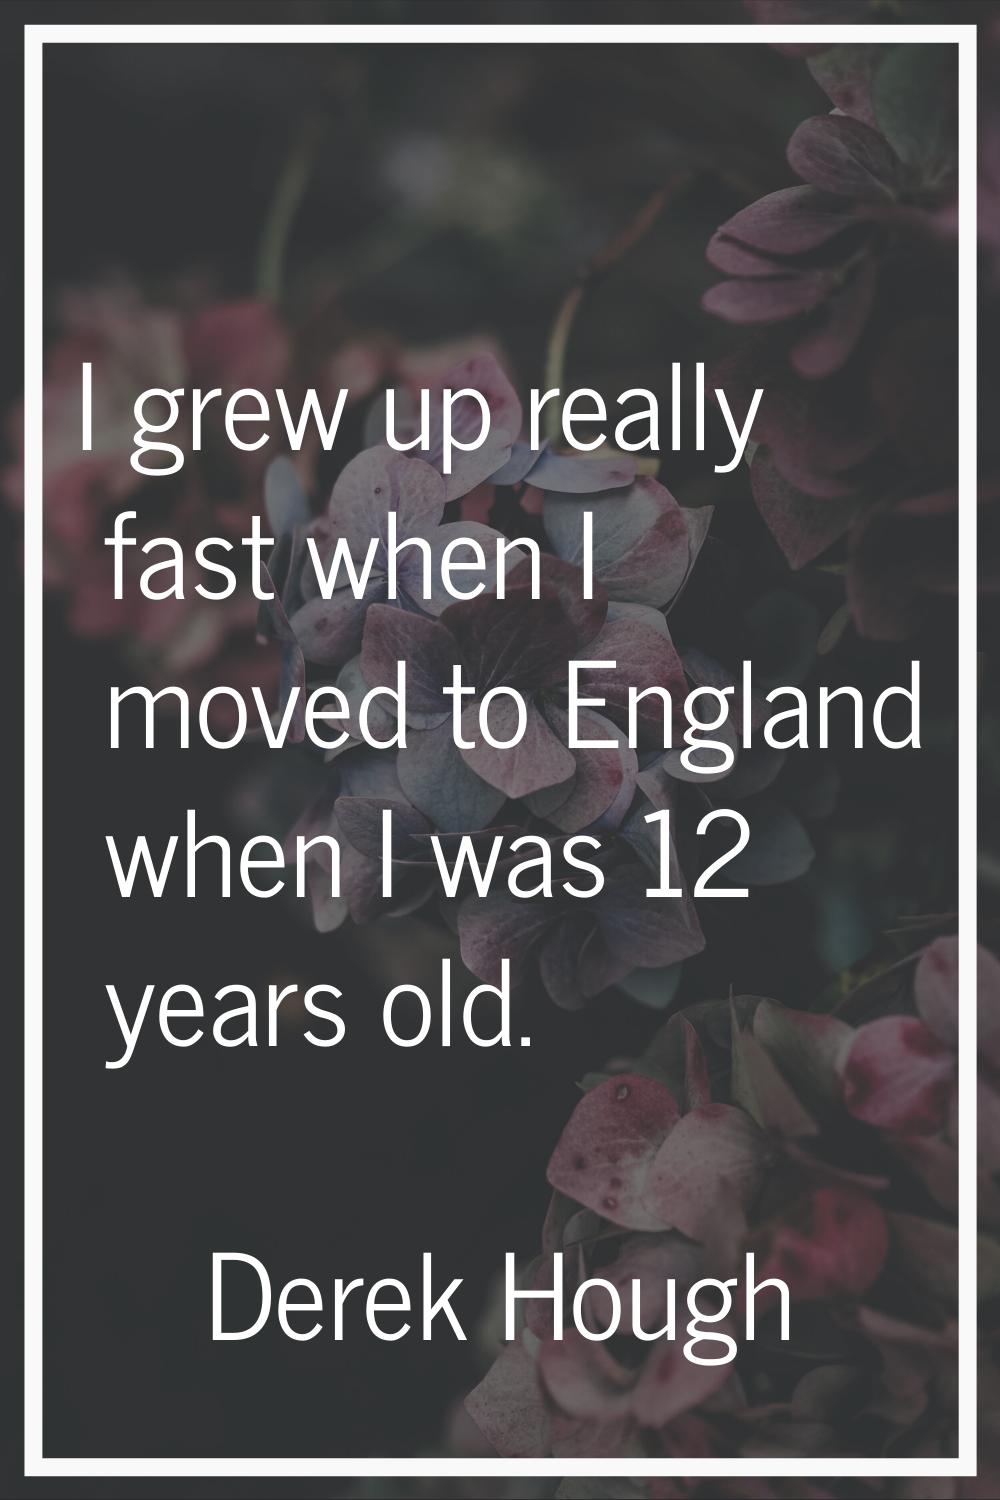 I grew up really fast when I moved to England when I was 12 years old.